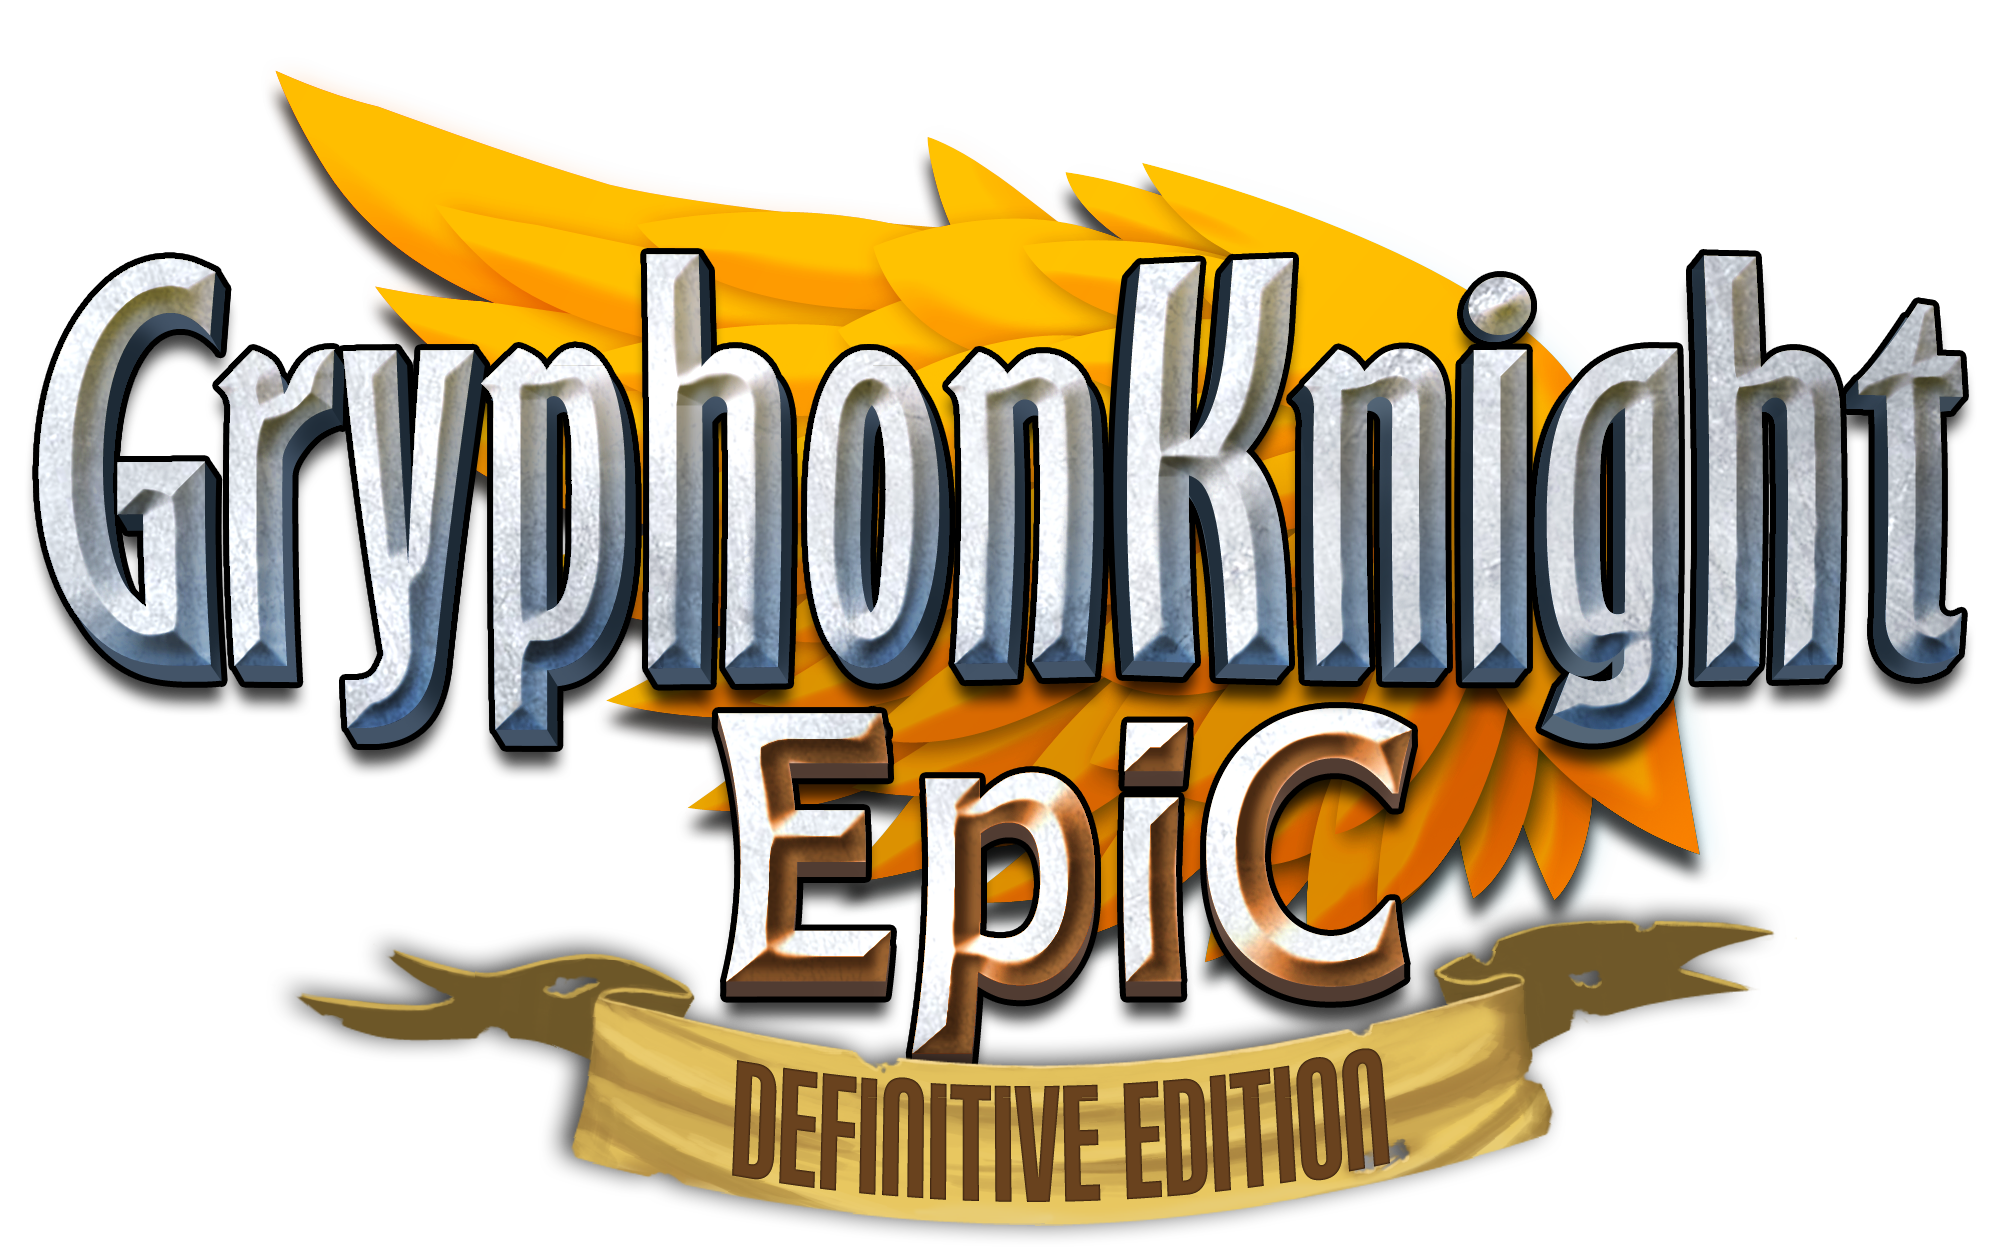 Gryphon Knight Epic Definitive Edition